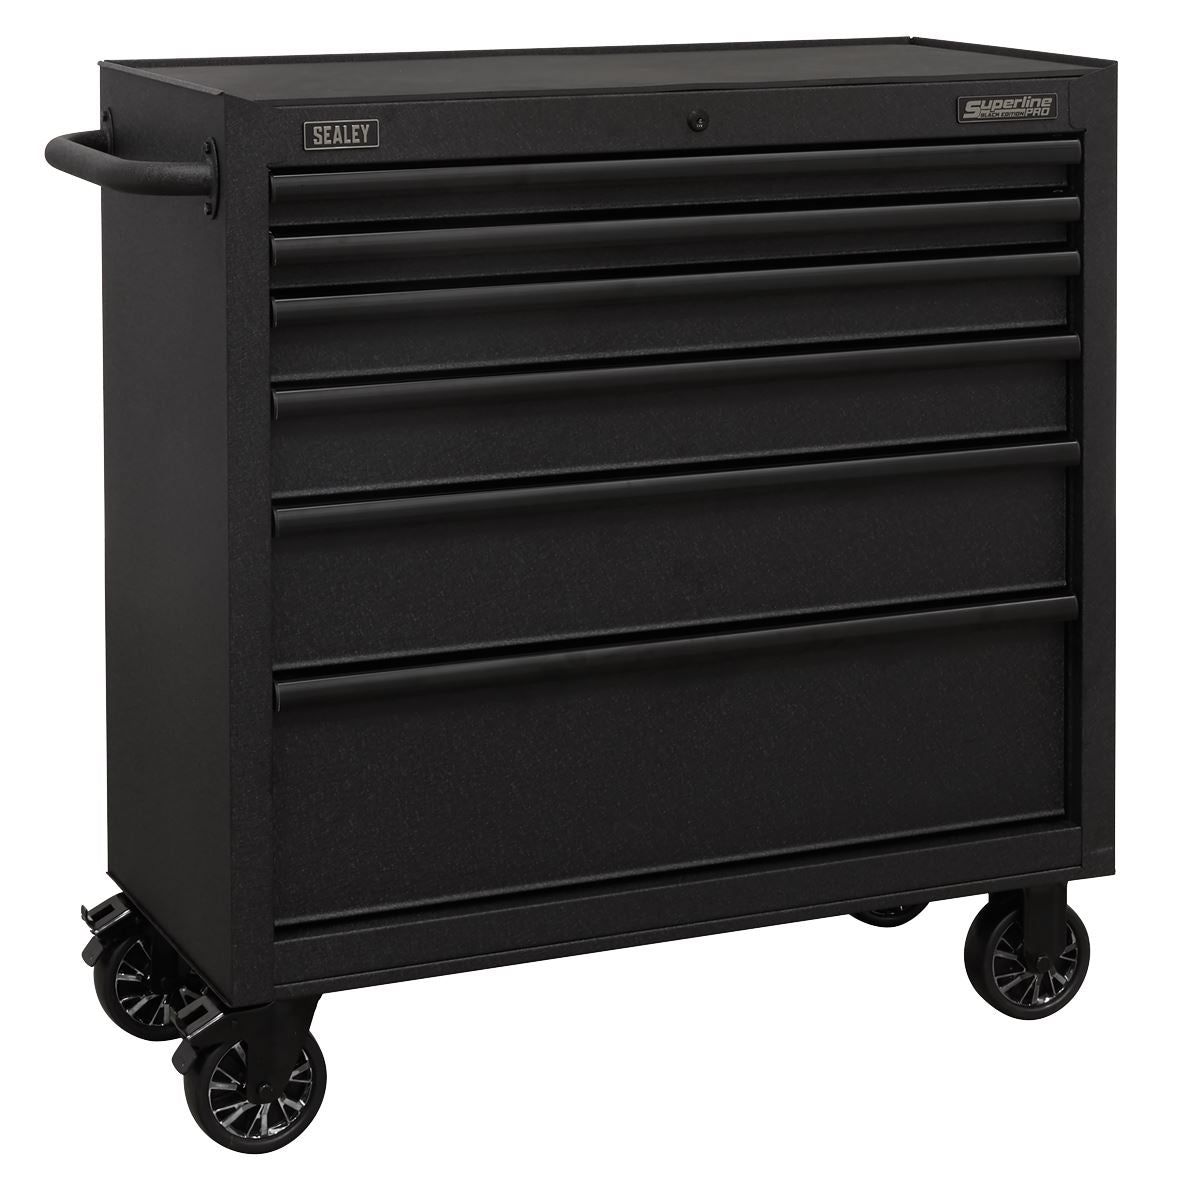 Sealey Superline Pro Rollcab 6 Drawer 915mm with Soft Close Drawers